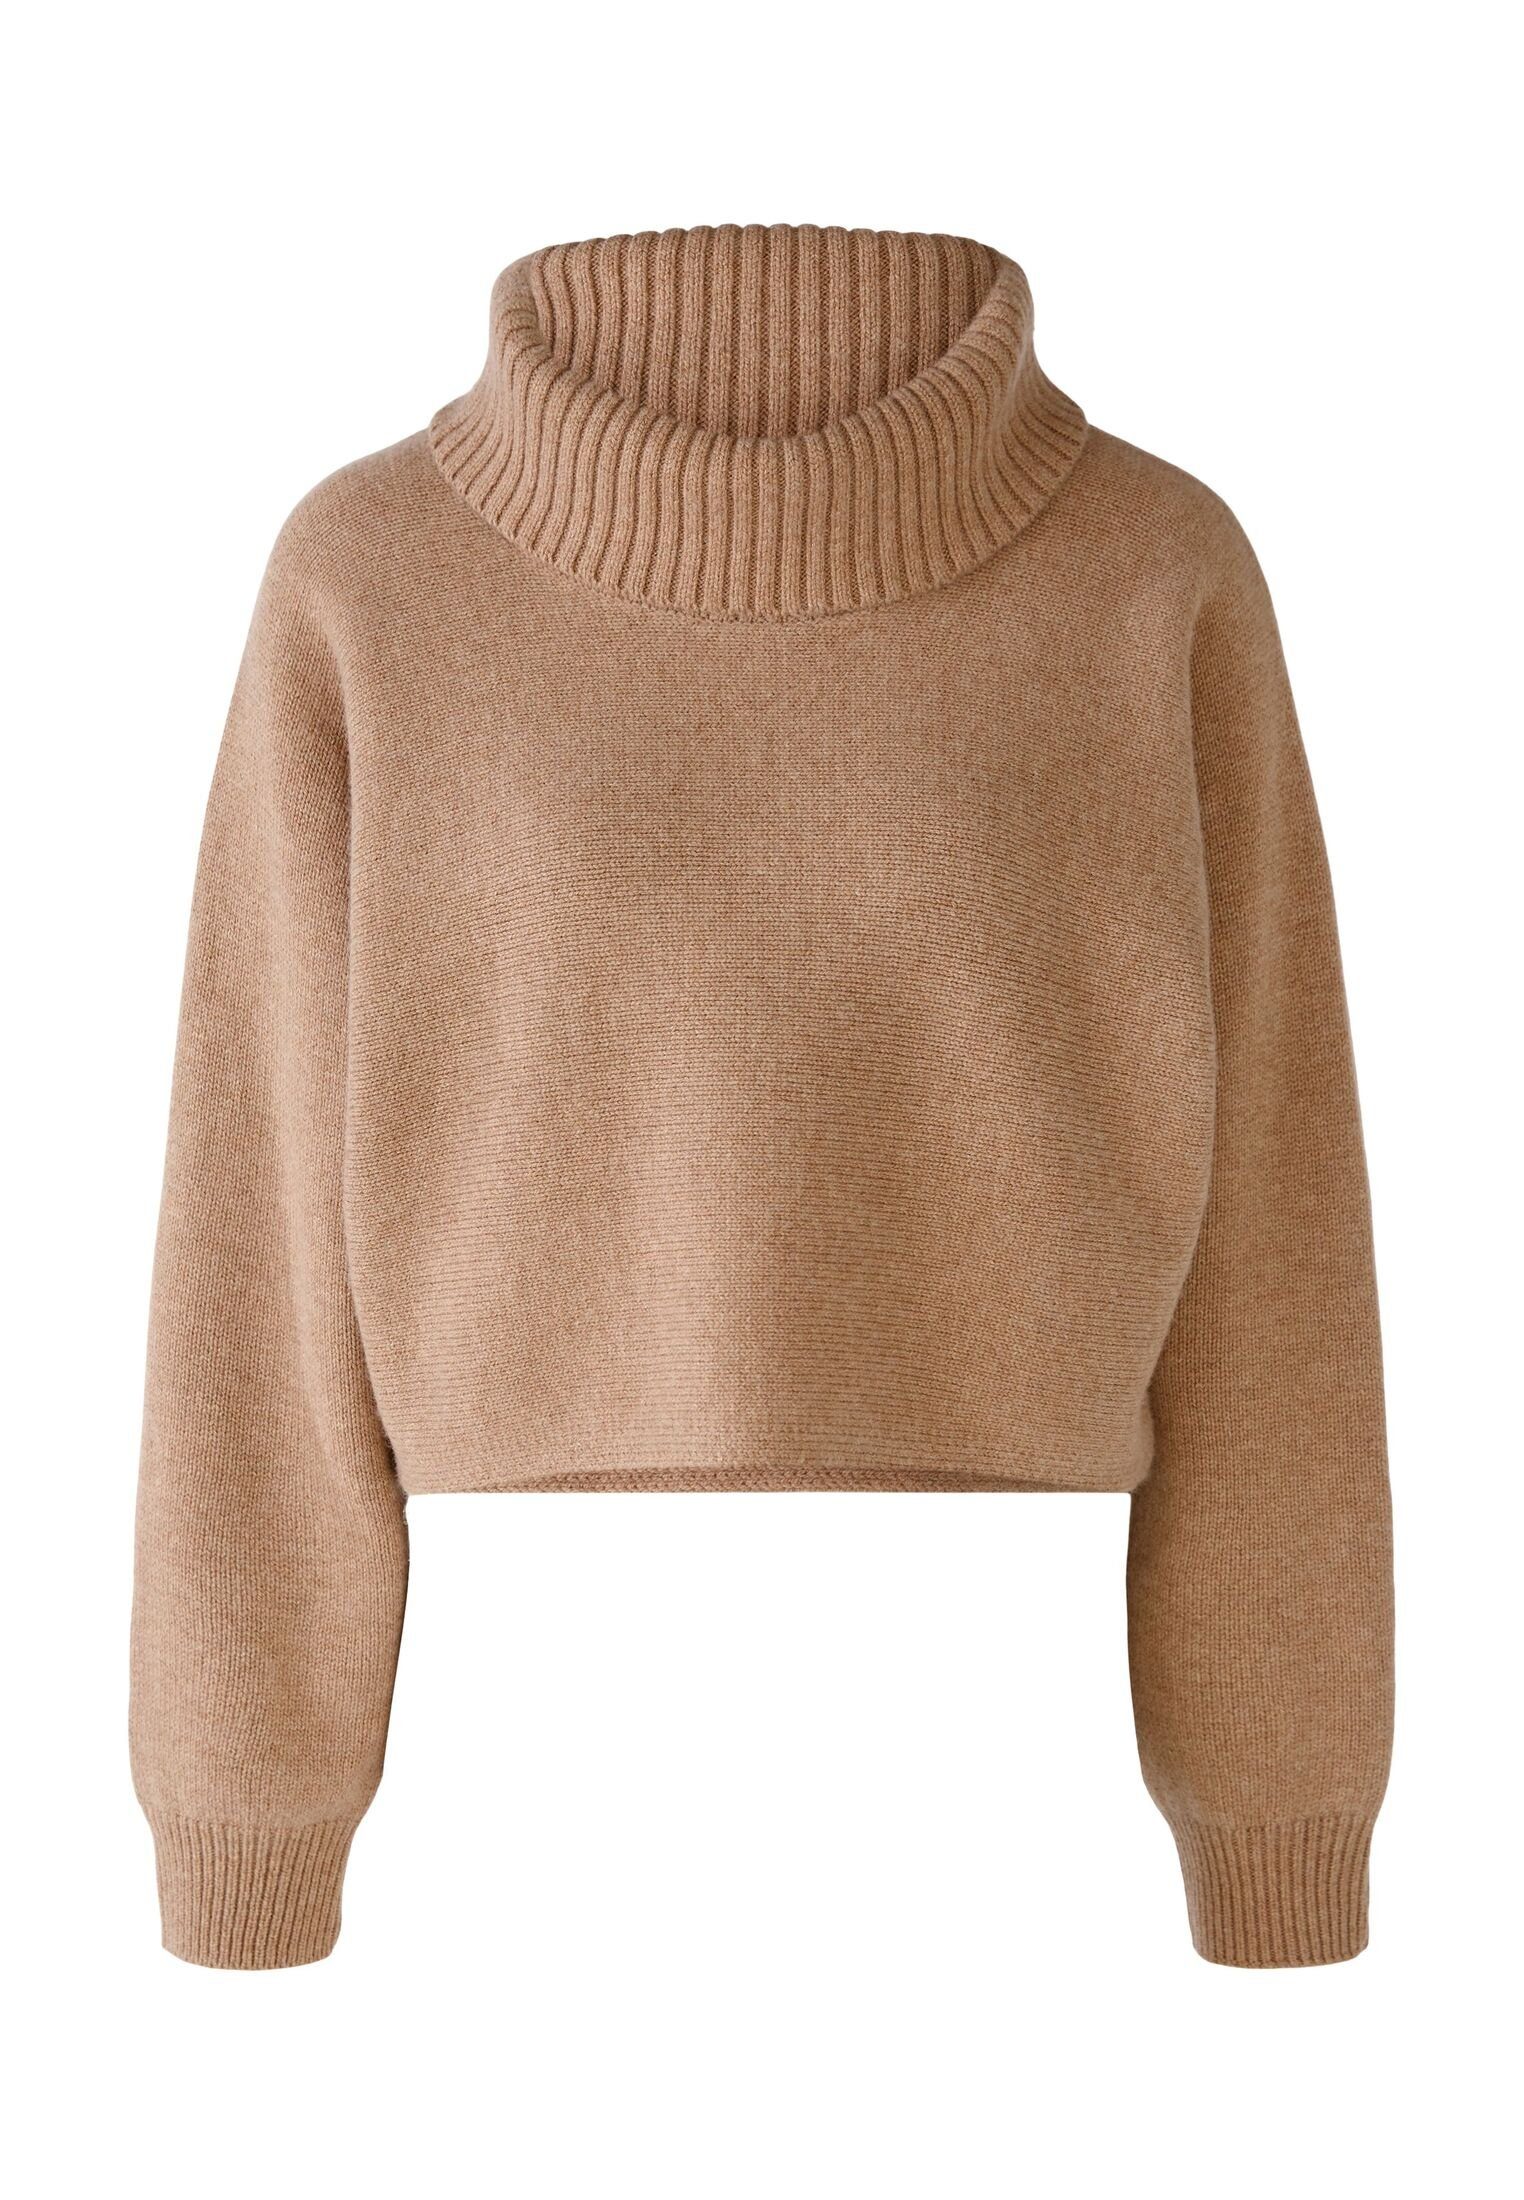 Wollmischung camel Pullover Oui Strickpullover